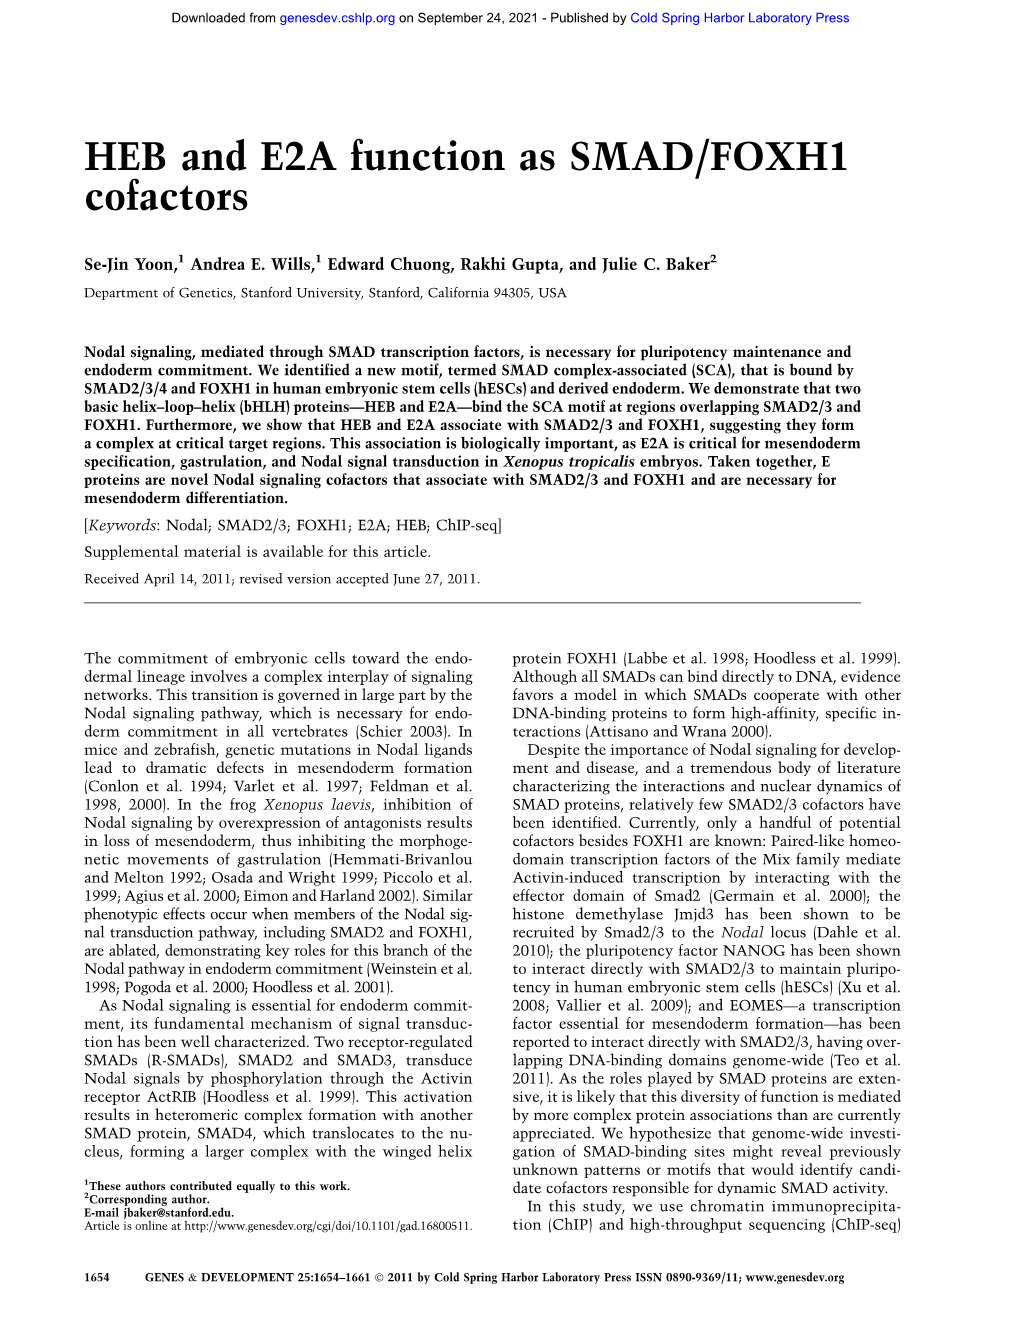 HEB and E2A Function As SMAD/FOXH1 Cofactors